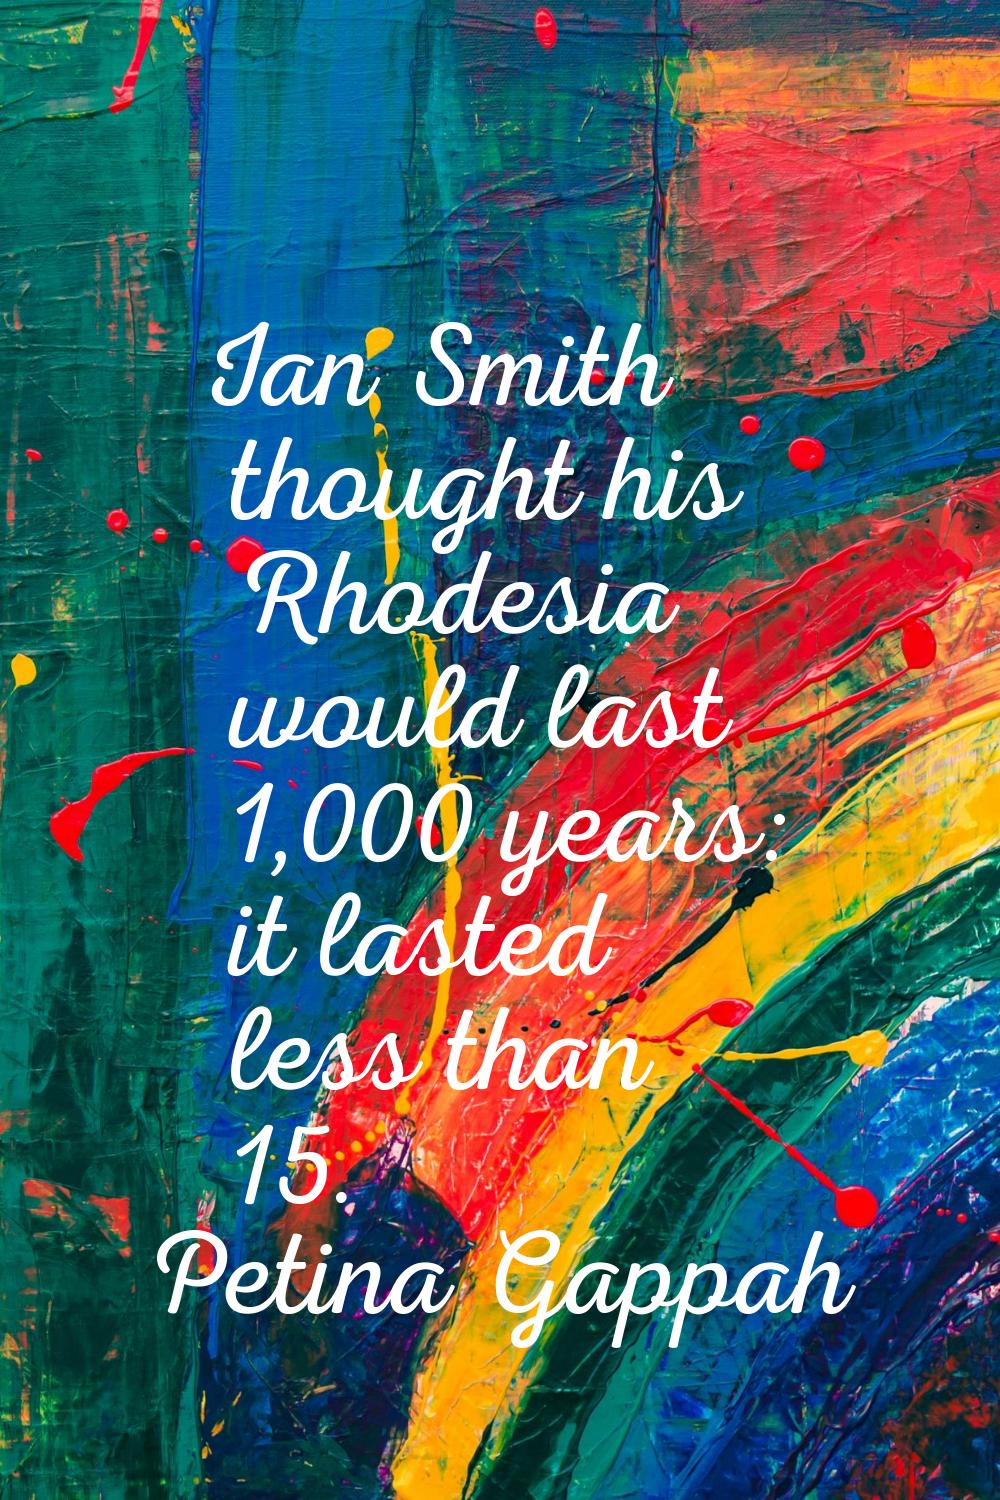 Ian Smith thought his Rhodesia would last 1,000 years: it lasted less than 15.